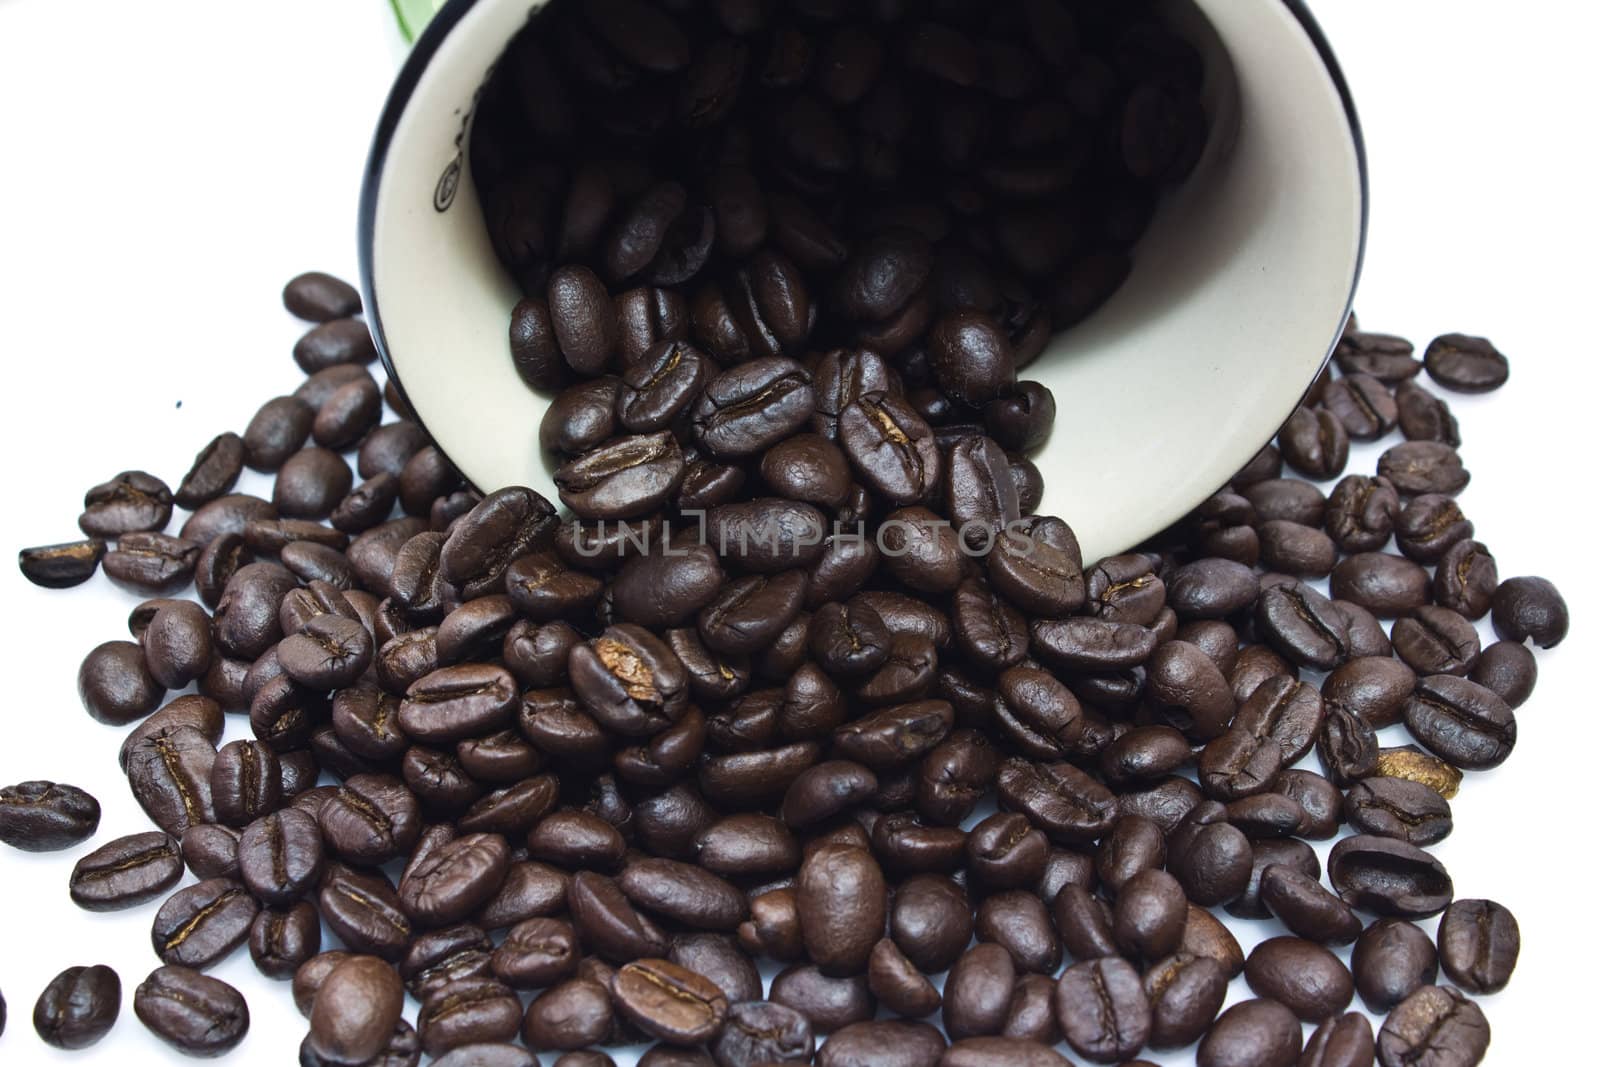 Black coffee beans in bowl on white background